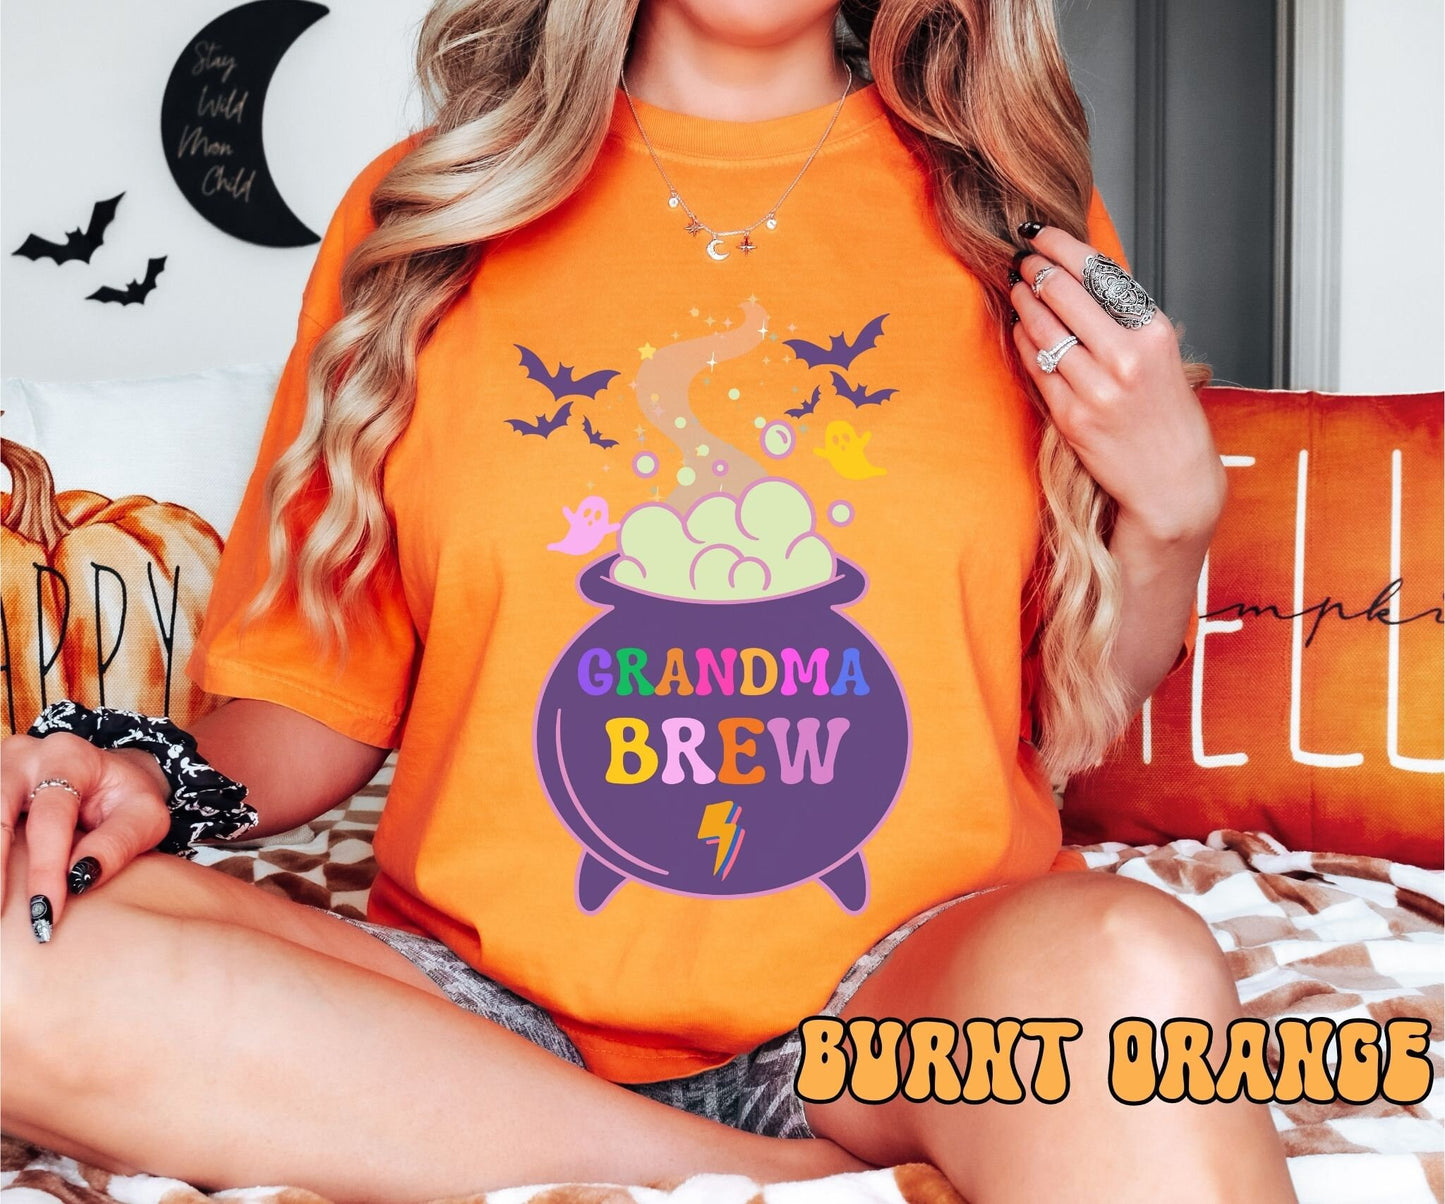 A shirt with a witch’s cauldron pouring out smoke with bats and ghosts in the air. The cauldron has text that says Grandma Brew